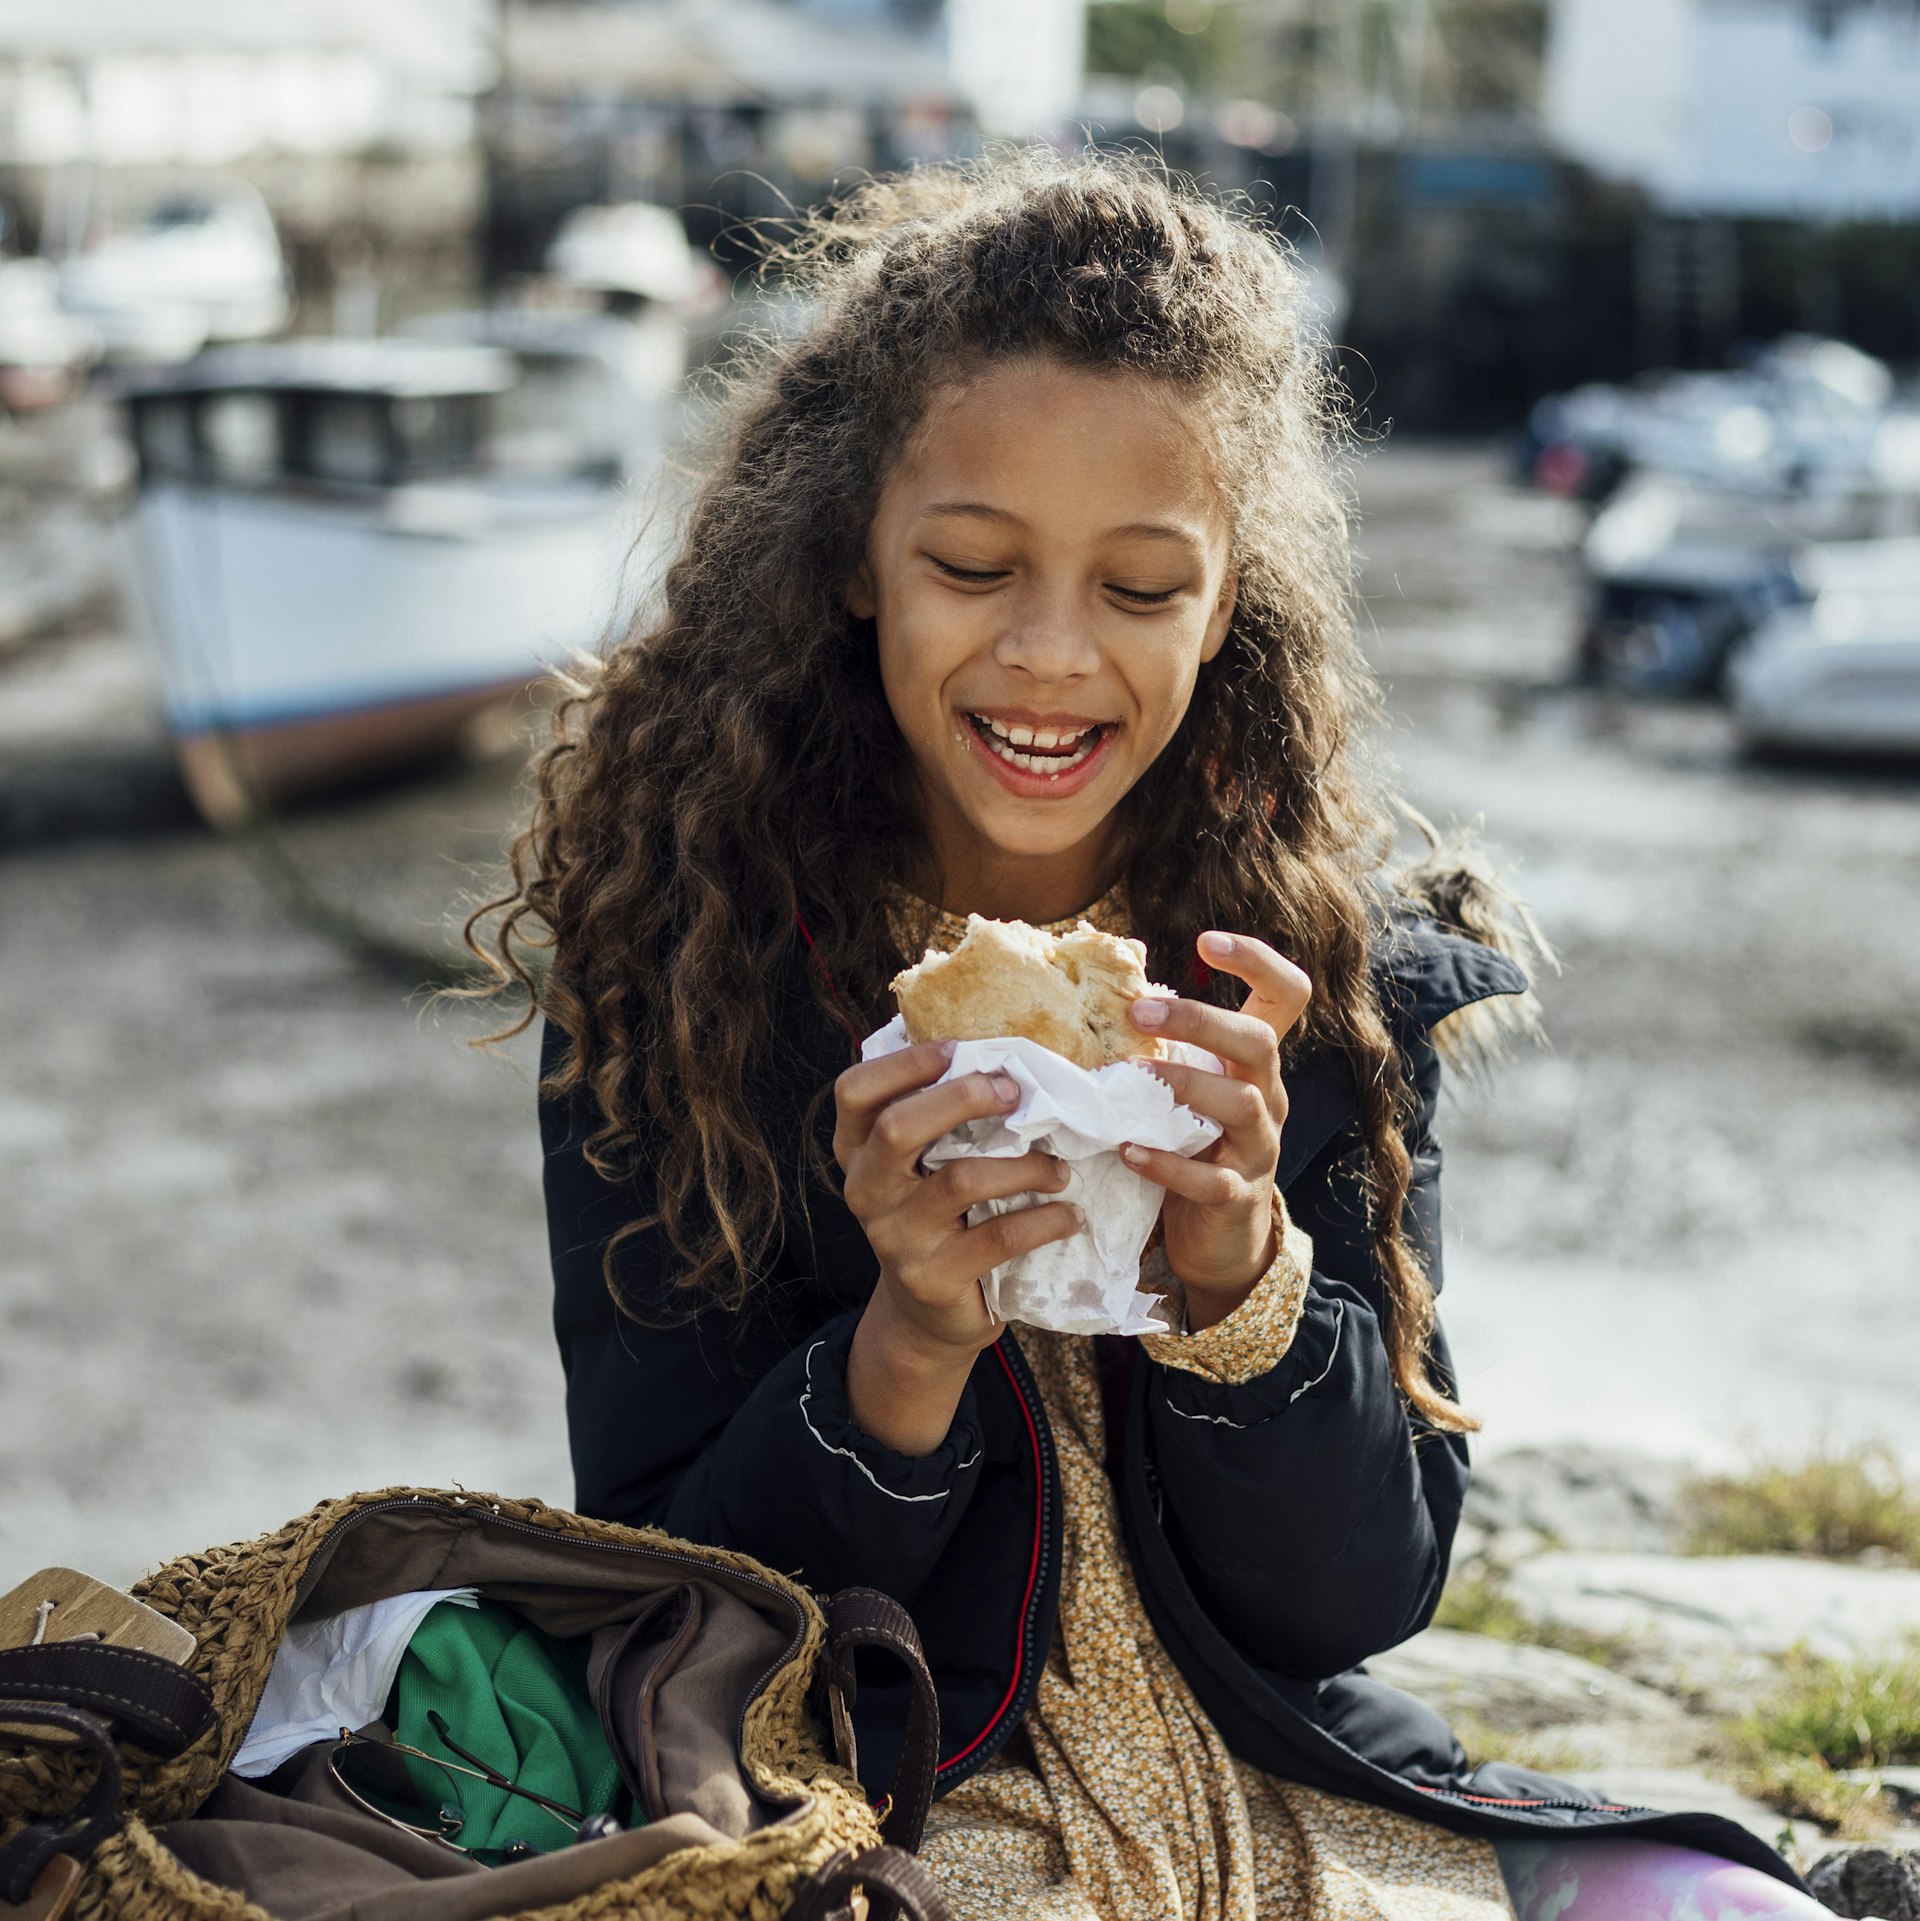 A young girl sitting on a stone wall in the fishing village of Polperro, Cornwall. She is eating a Cornish pasty while smiling.